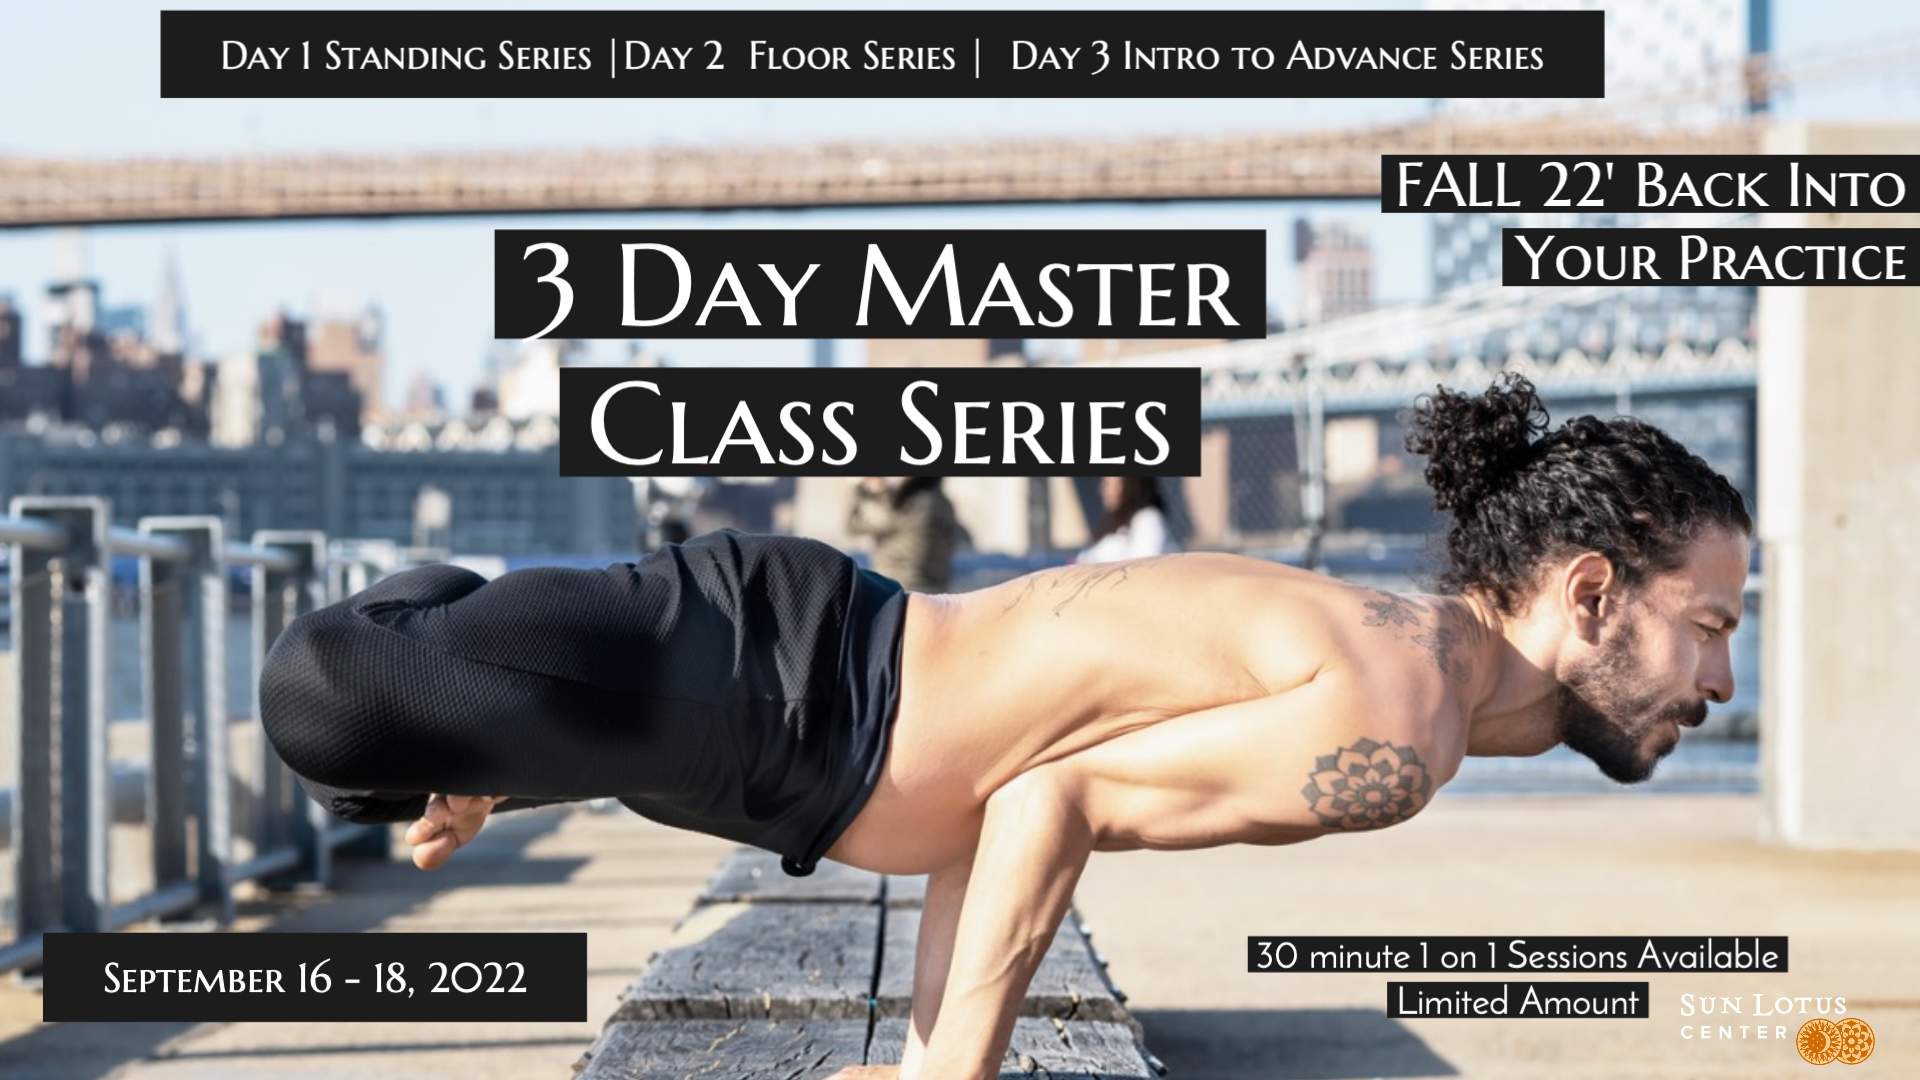 3 Day Master Class Series with Joseph Encinia